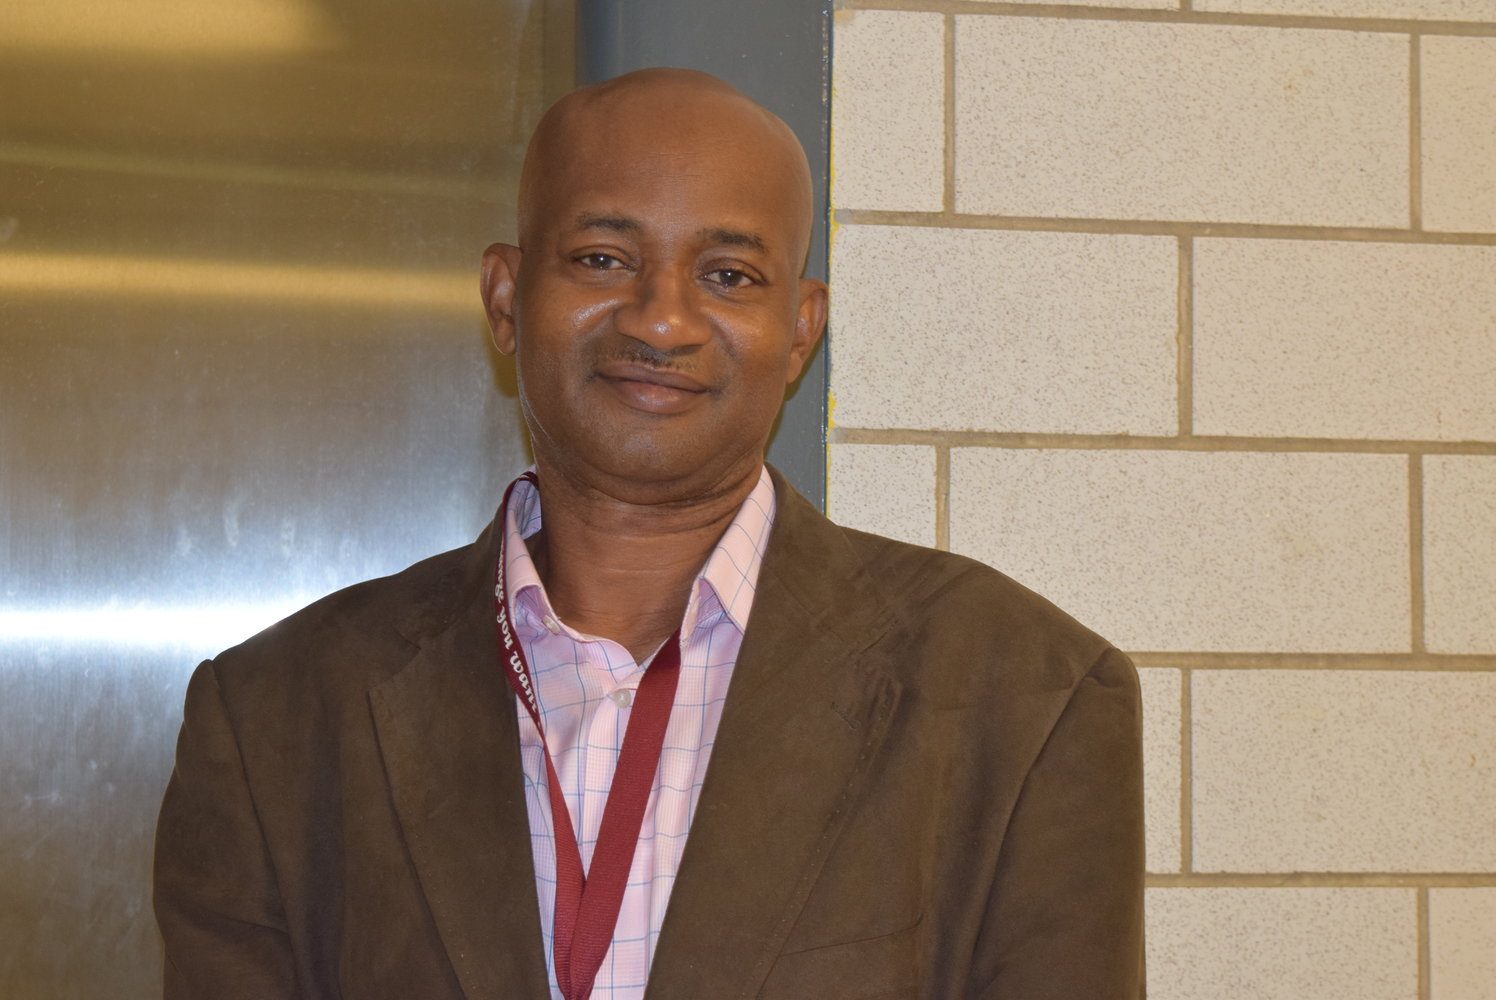 Mr. Ukandu joins the ranks of the HHS faculty. (Photo Credit: Liza Keane)